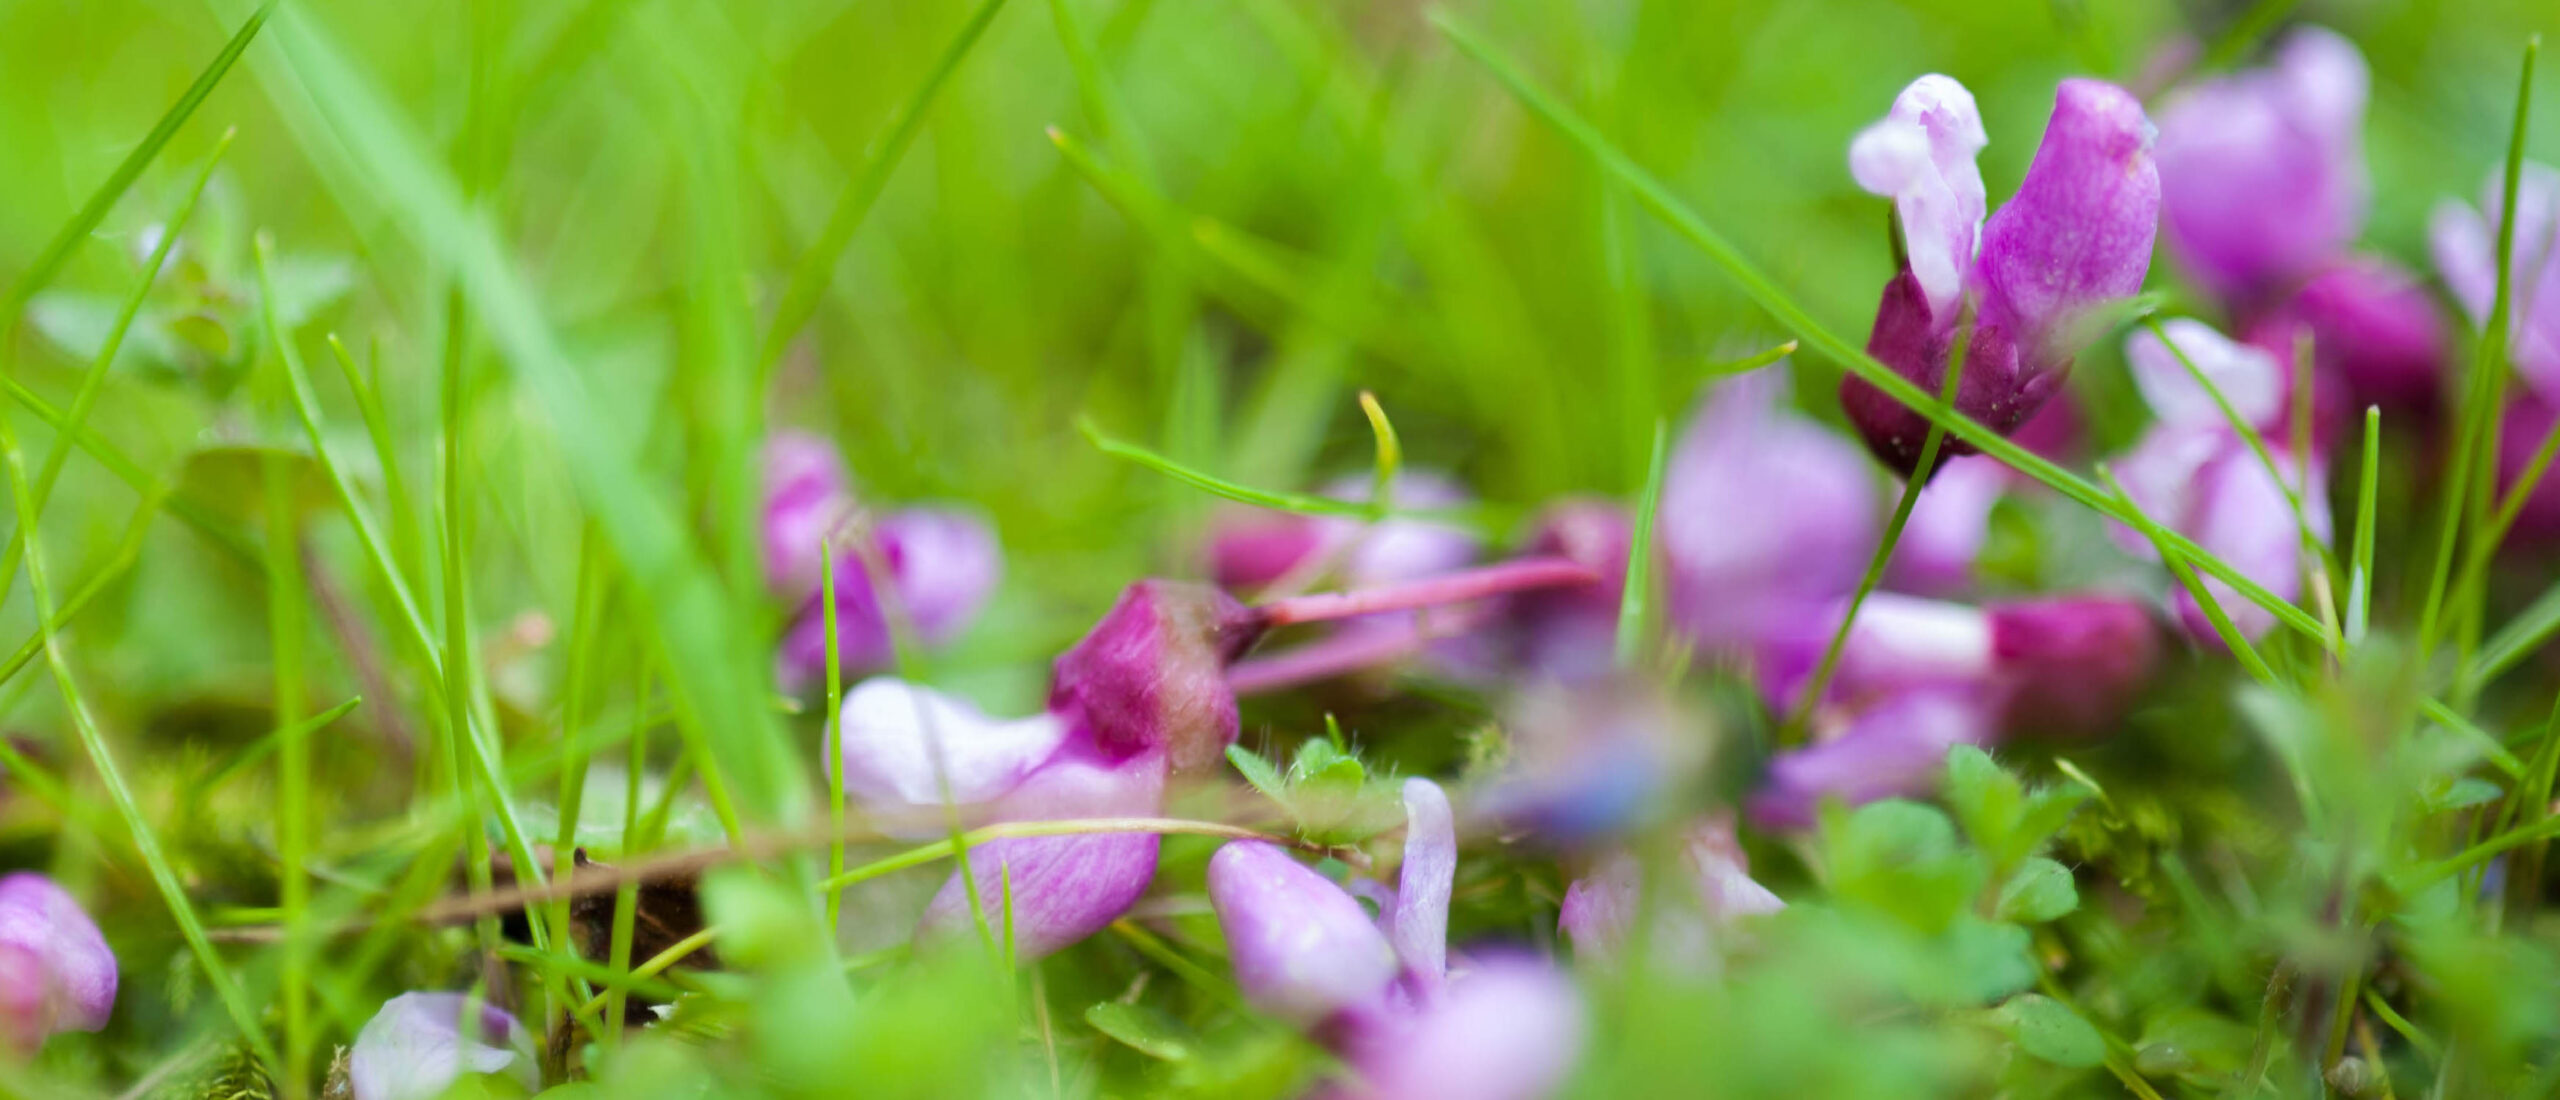 close up of purple flower petals in grass